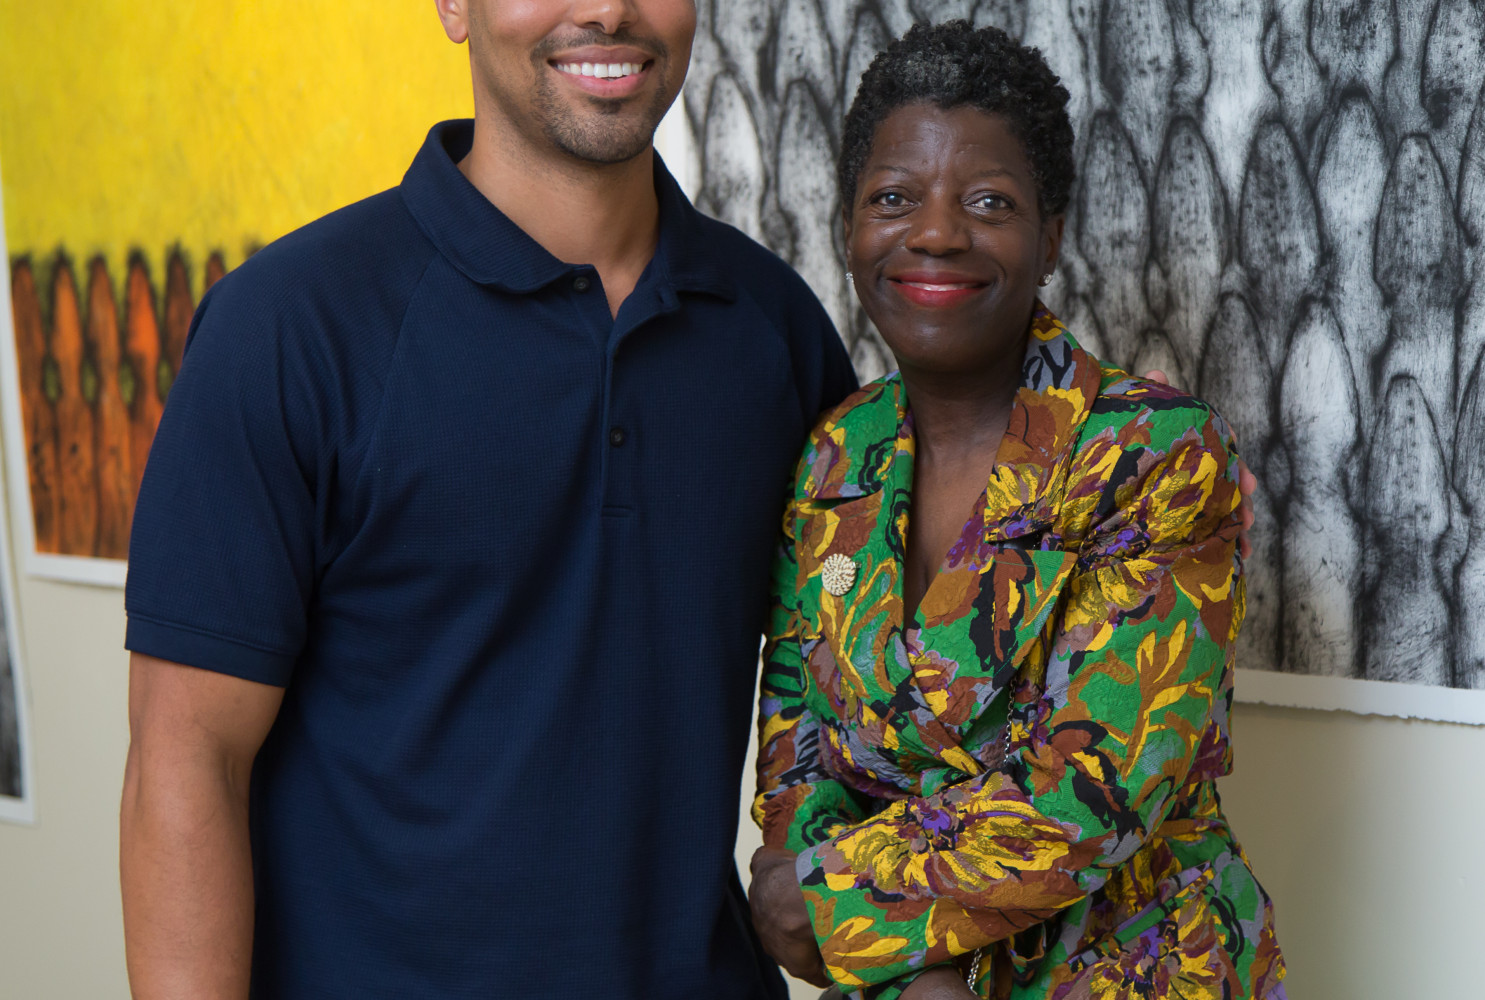 Visiting Artist Fletcher Williams III with Thelma Golden, Director and Chief Curator of The Studio Museum in Harlem. MCG Photography